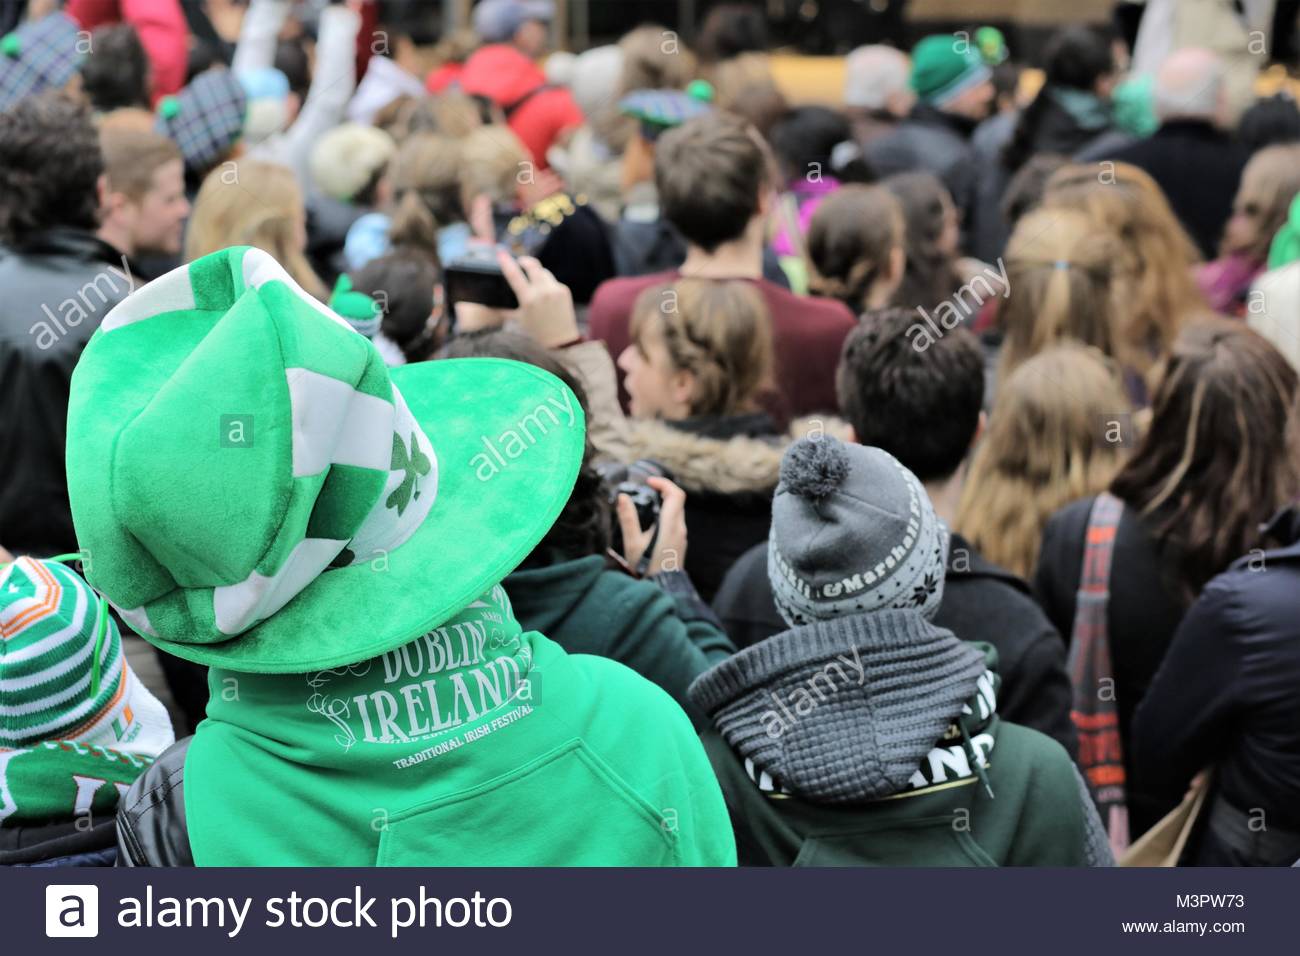 Green hat, green sweatshirt, green everywhere as the St Patrick's day festival begins in Dublin, Ireland. Stock Photo